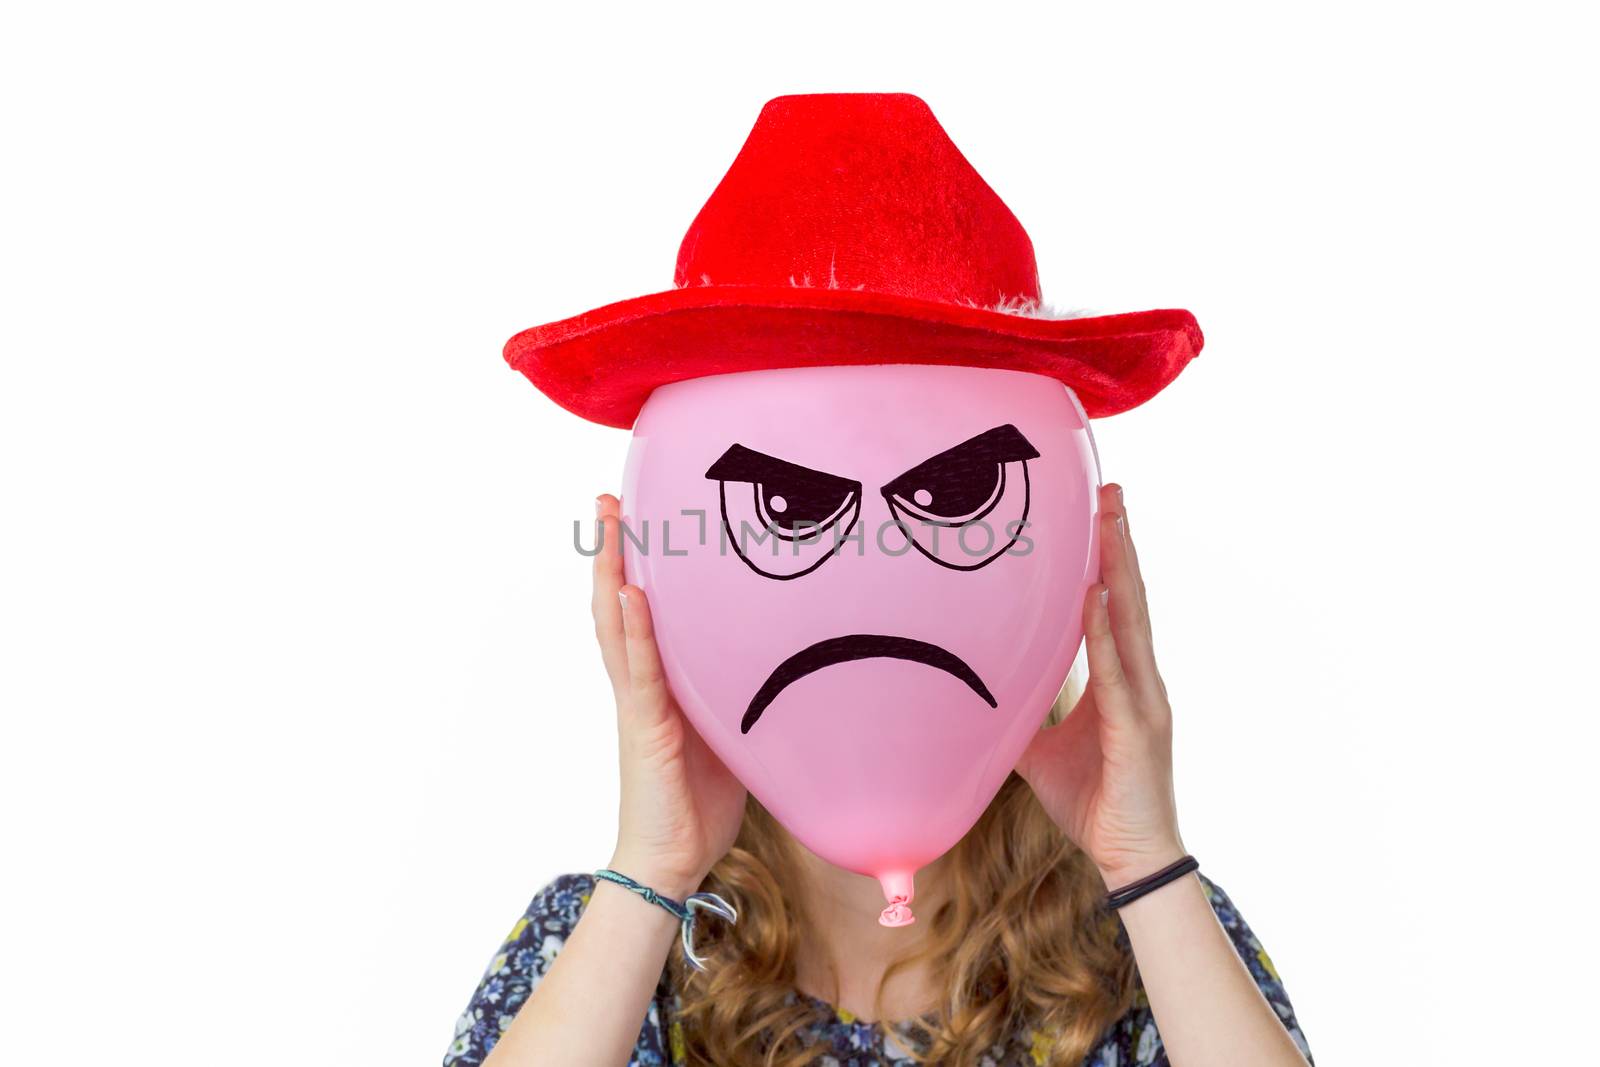 Girl holding pink balloon with angry face and red hat by BenSchonewille